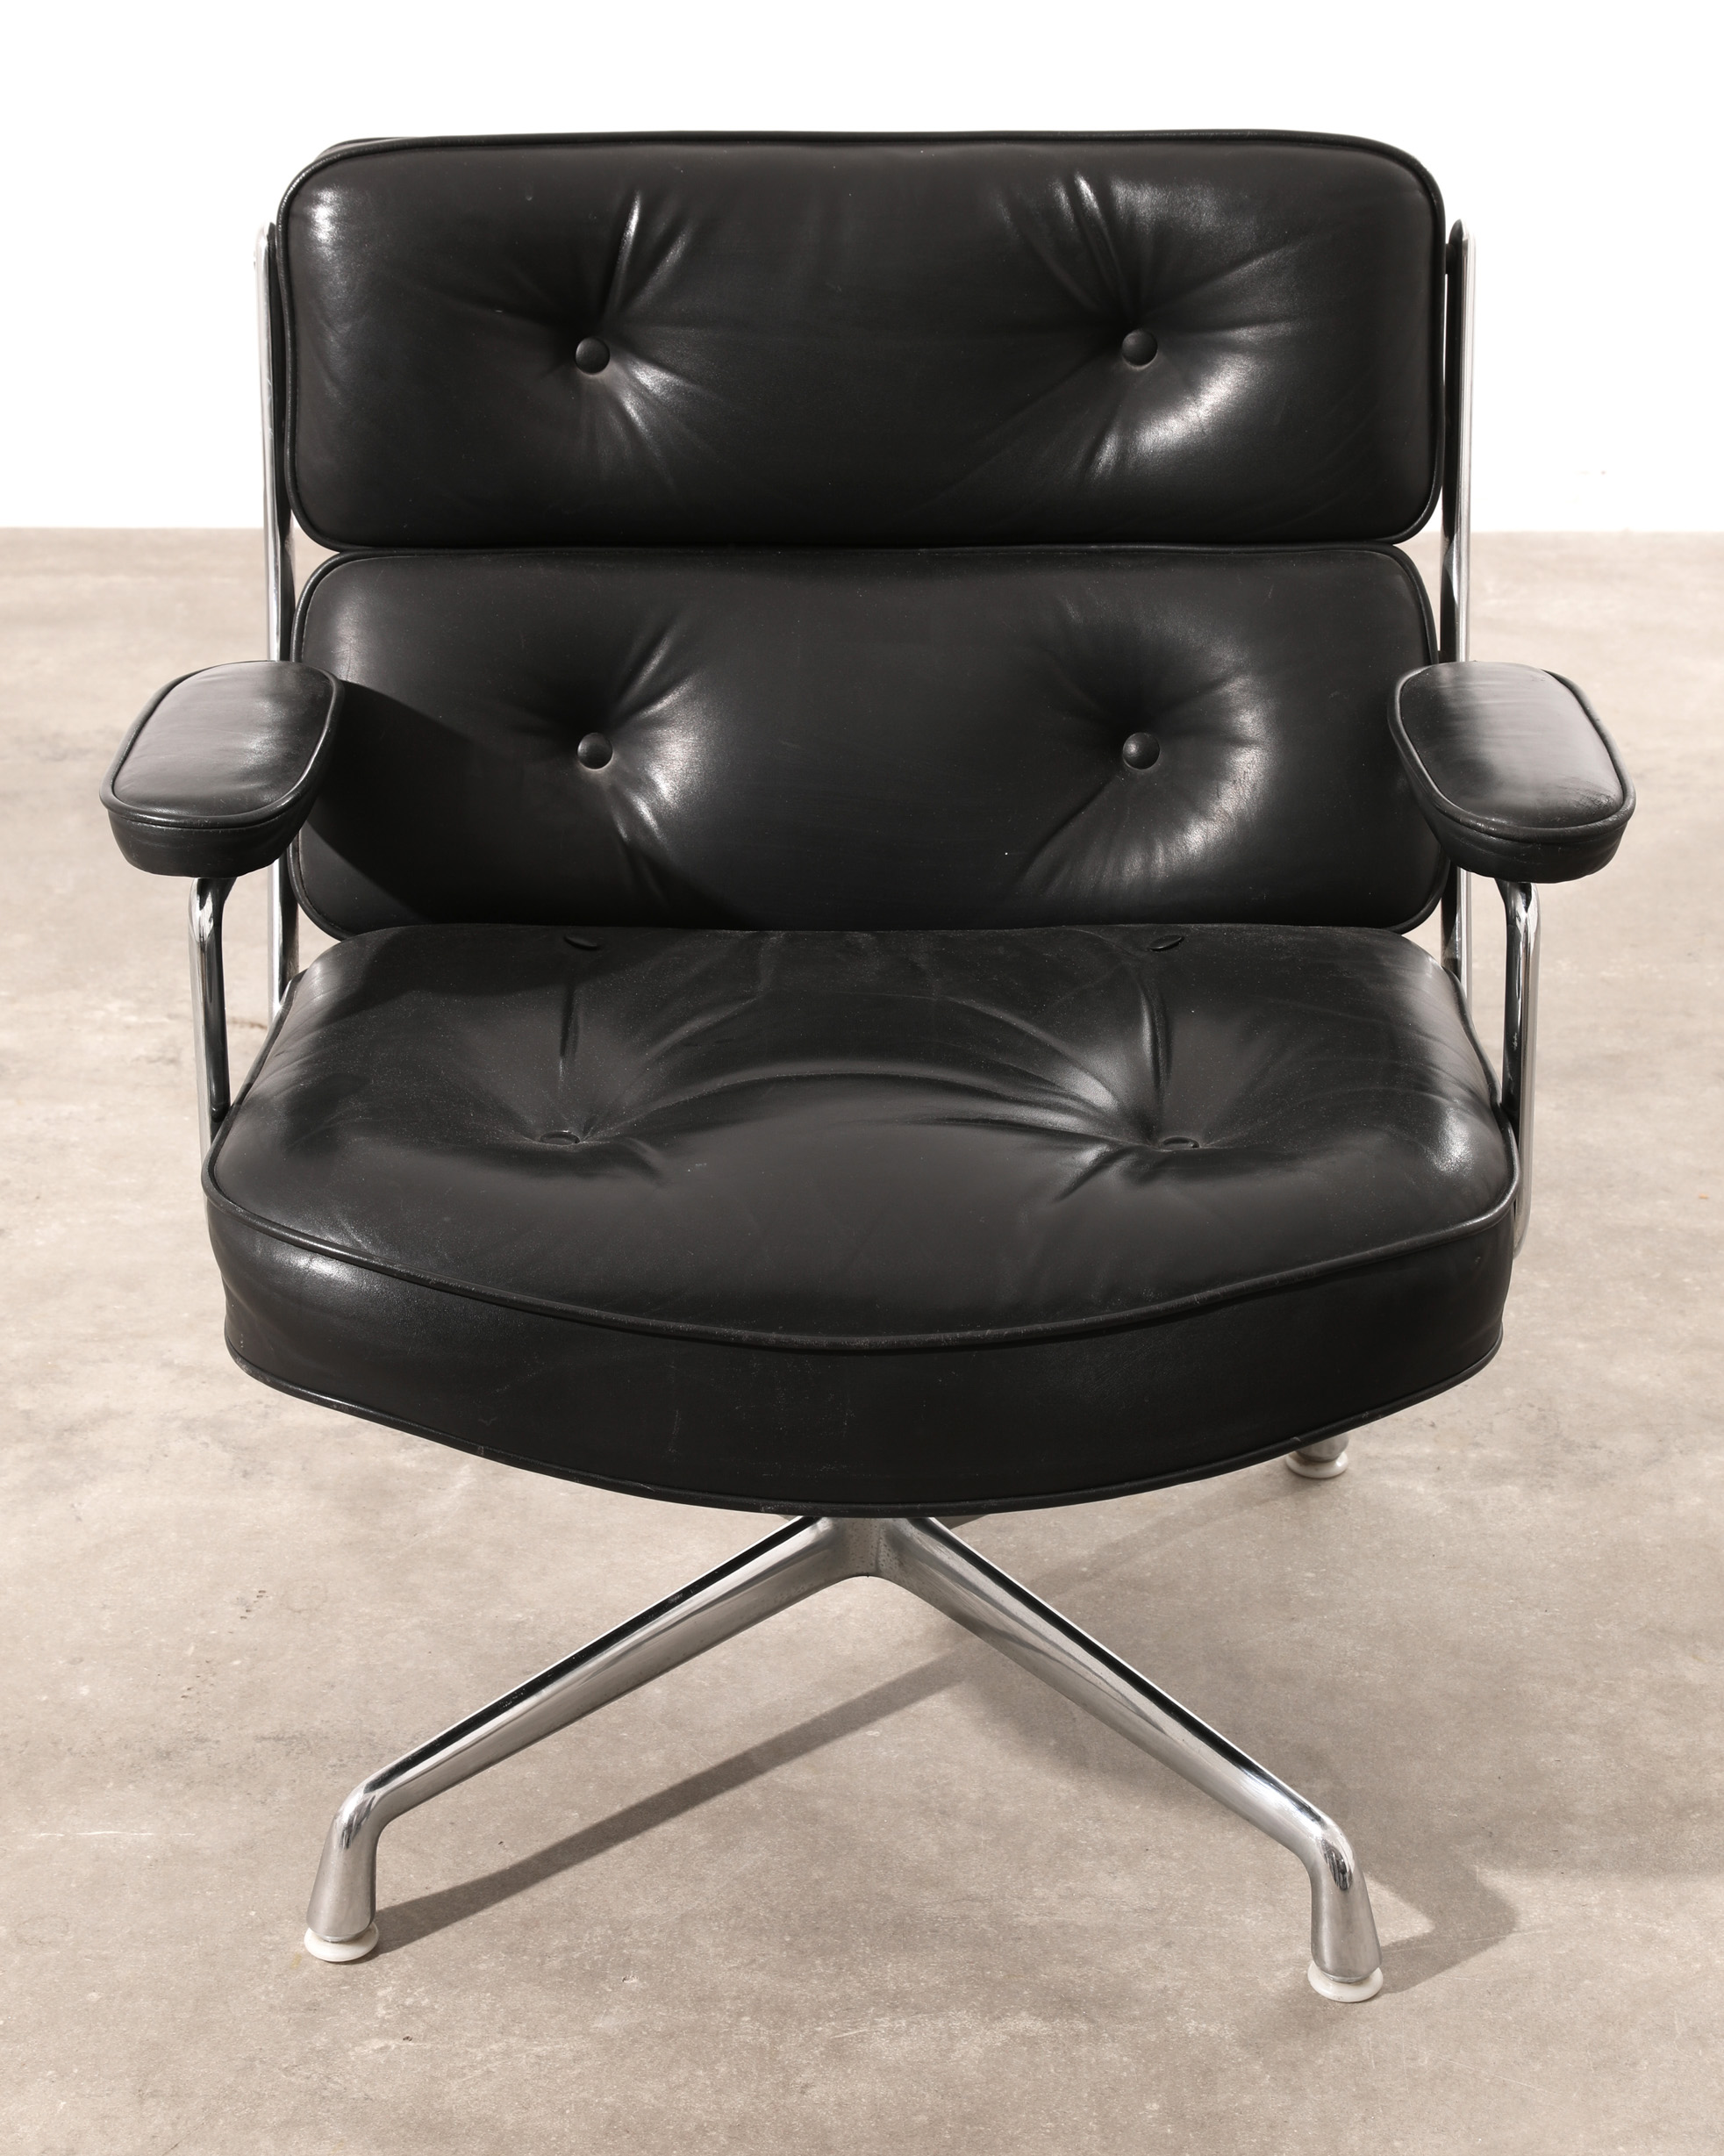 Charles & Ray Eames, Vitra, 4 Chairs, model Time Life Lobby Chair - Image 3 of 6